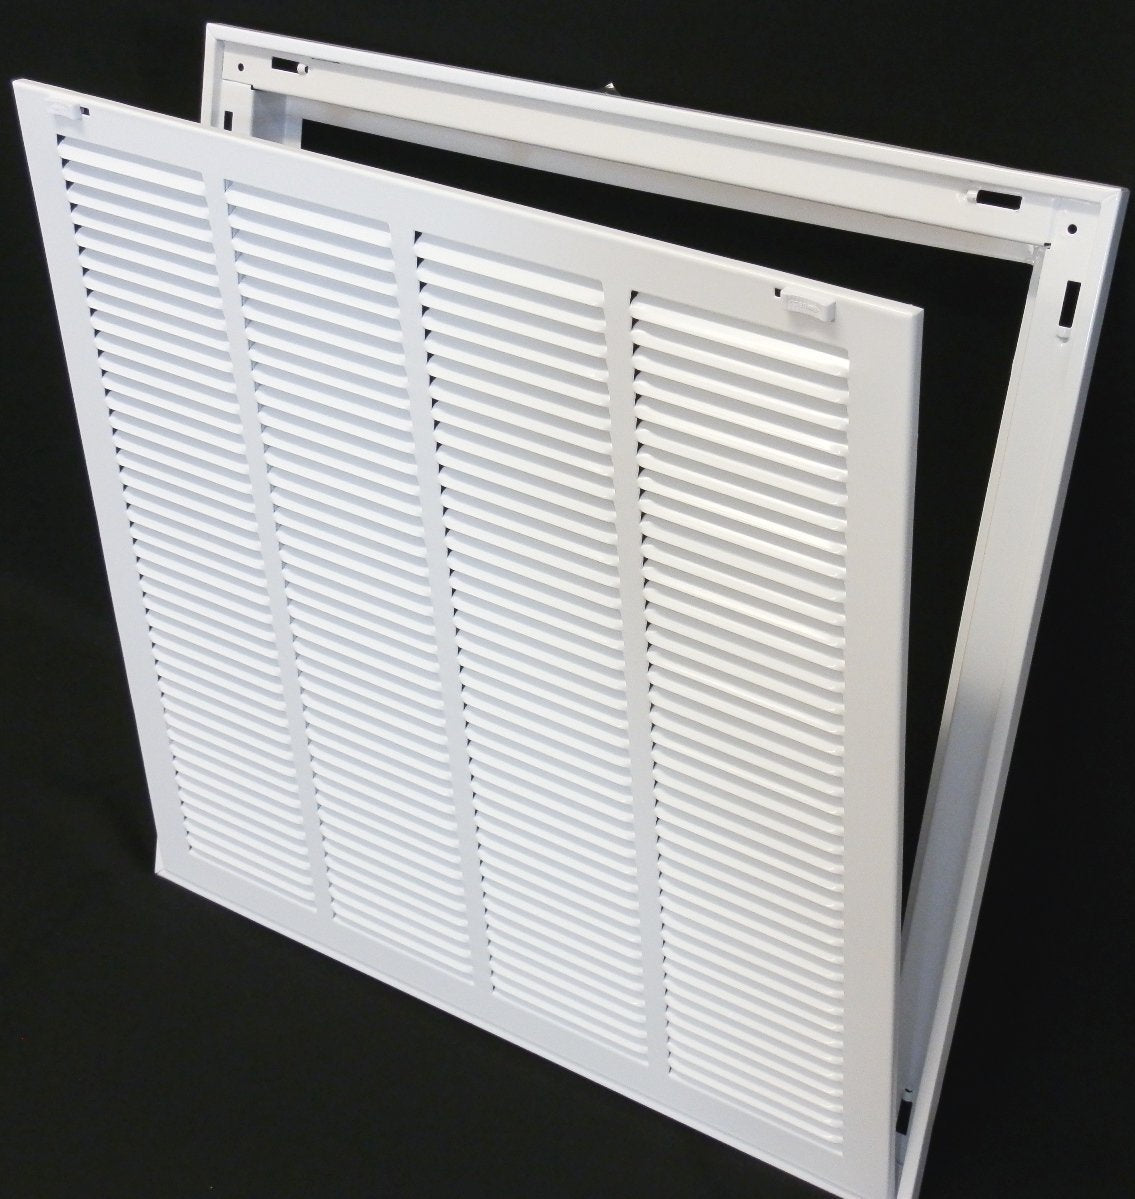 14&quot; X 34&quot; Steel Return Air Filter Grille for 1&quot; Filter - Removable Frame - [Outer Dimensions: 16 5/8&quot; X 36 5/8&quot;]